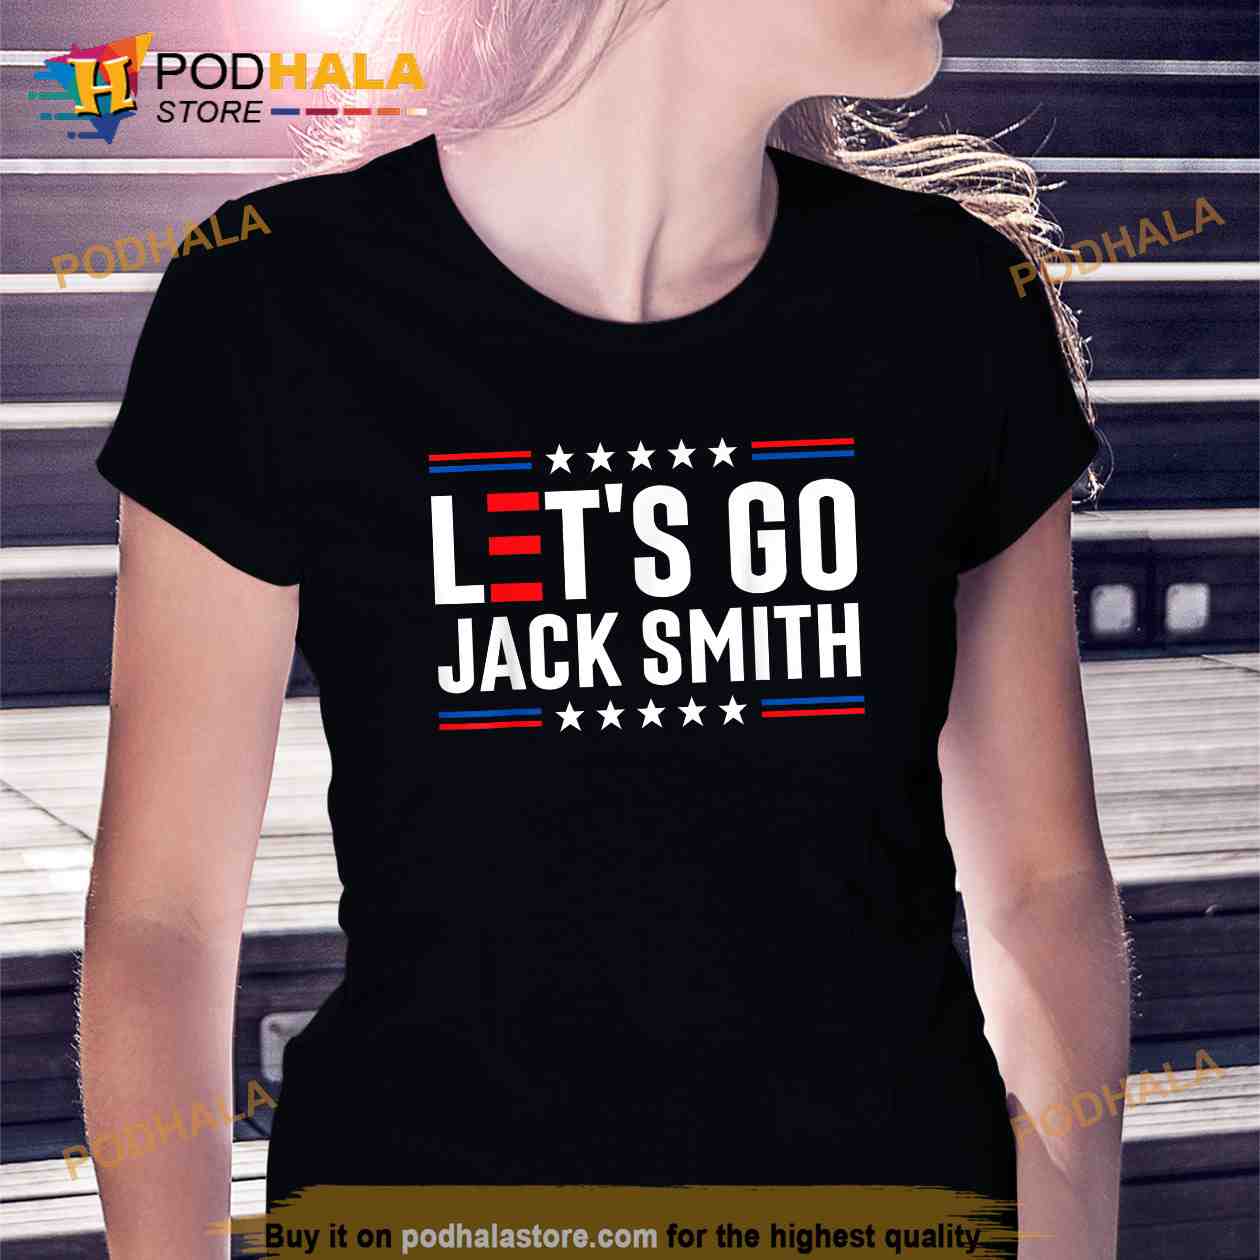 Personable, Conservative, Printing T-shirt Design for a Company by